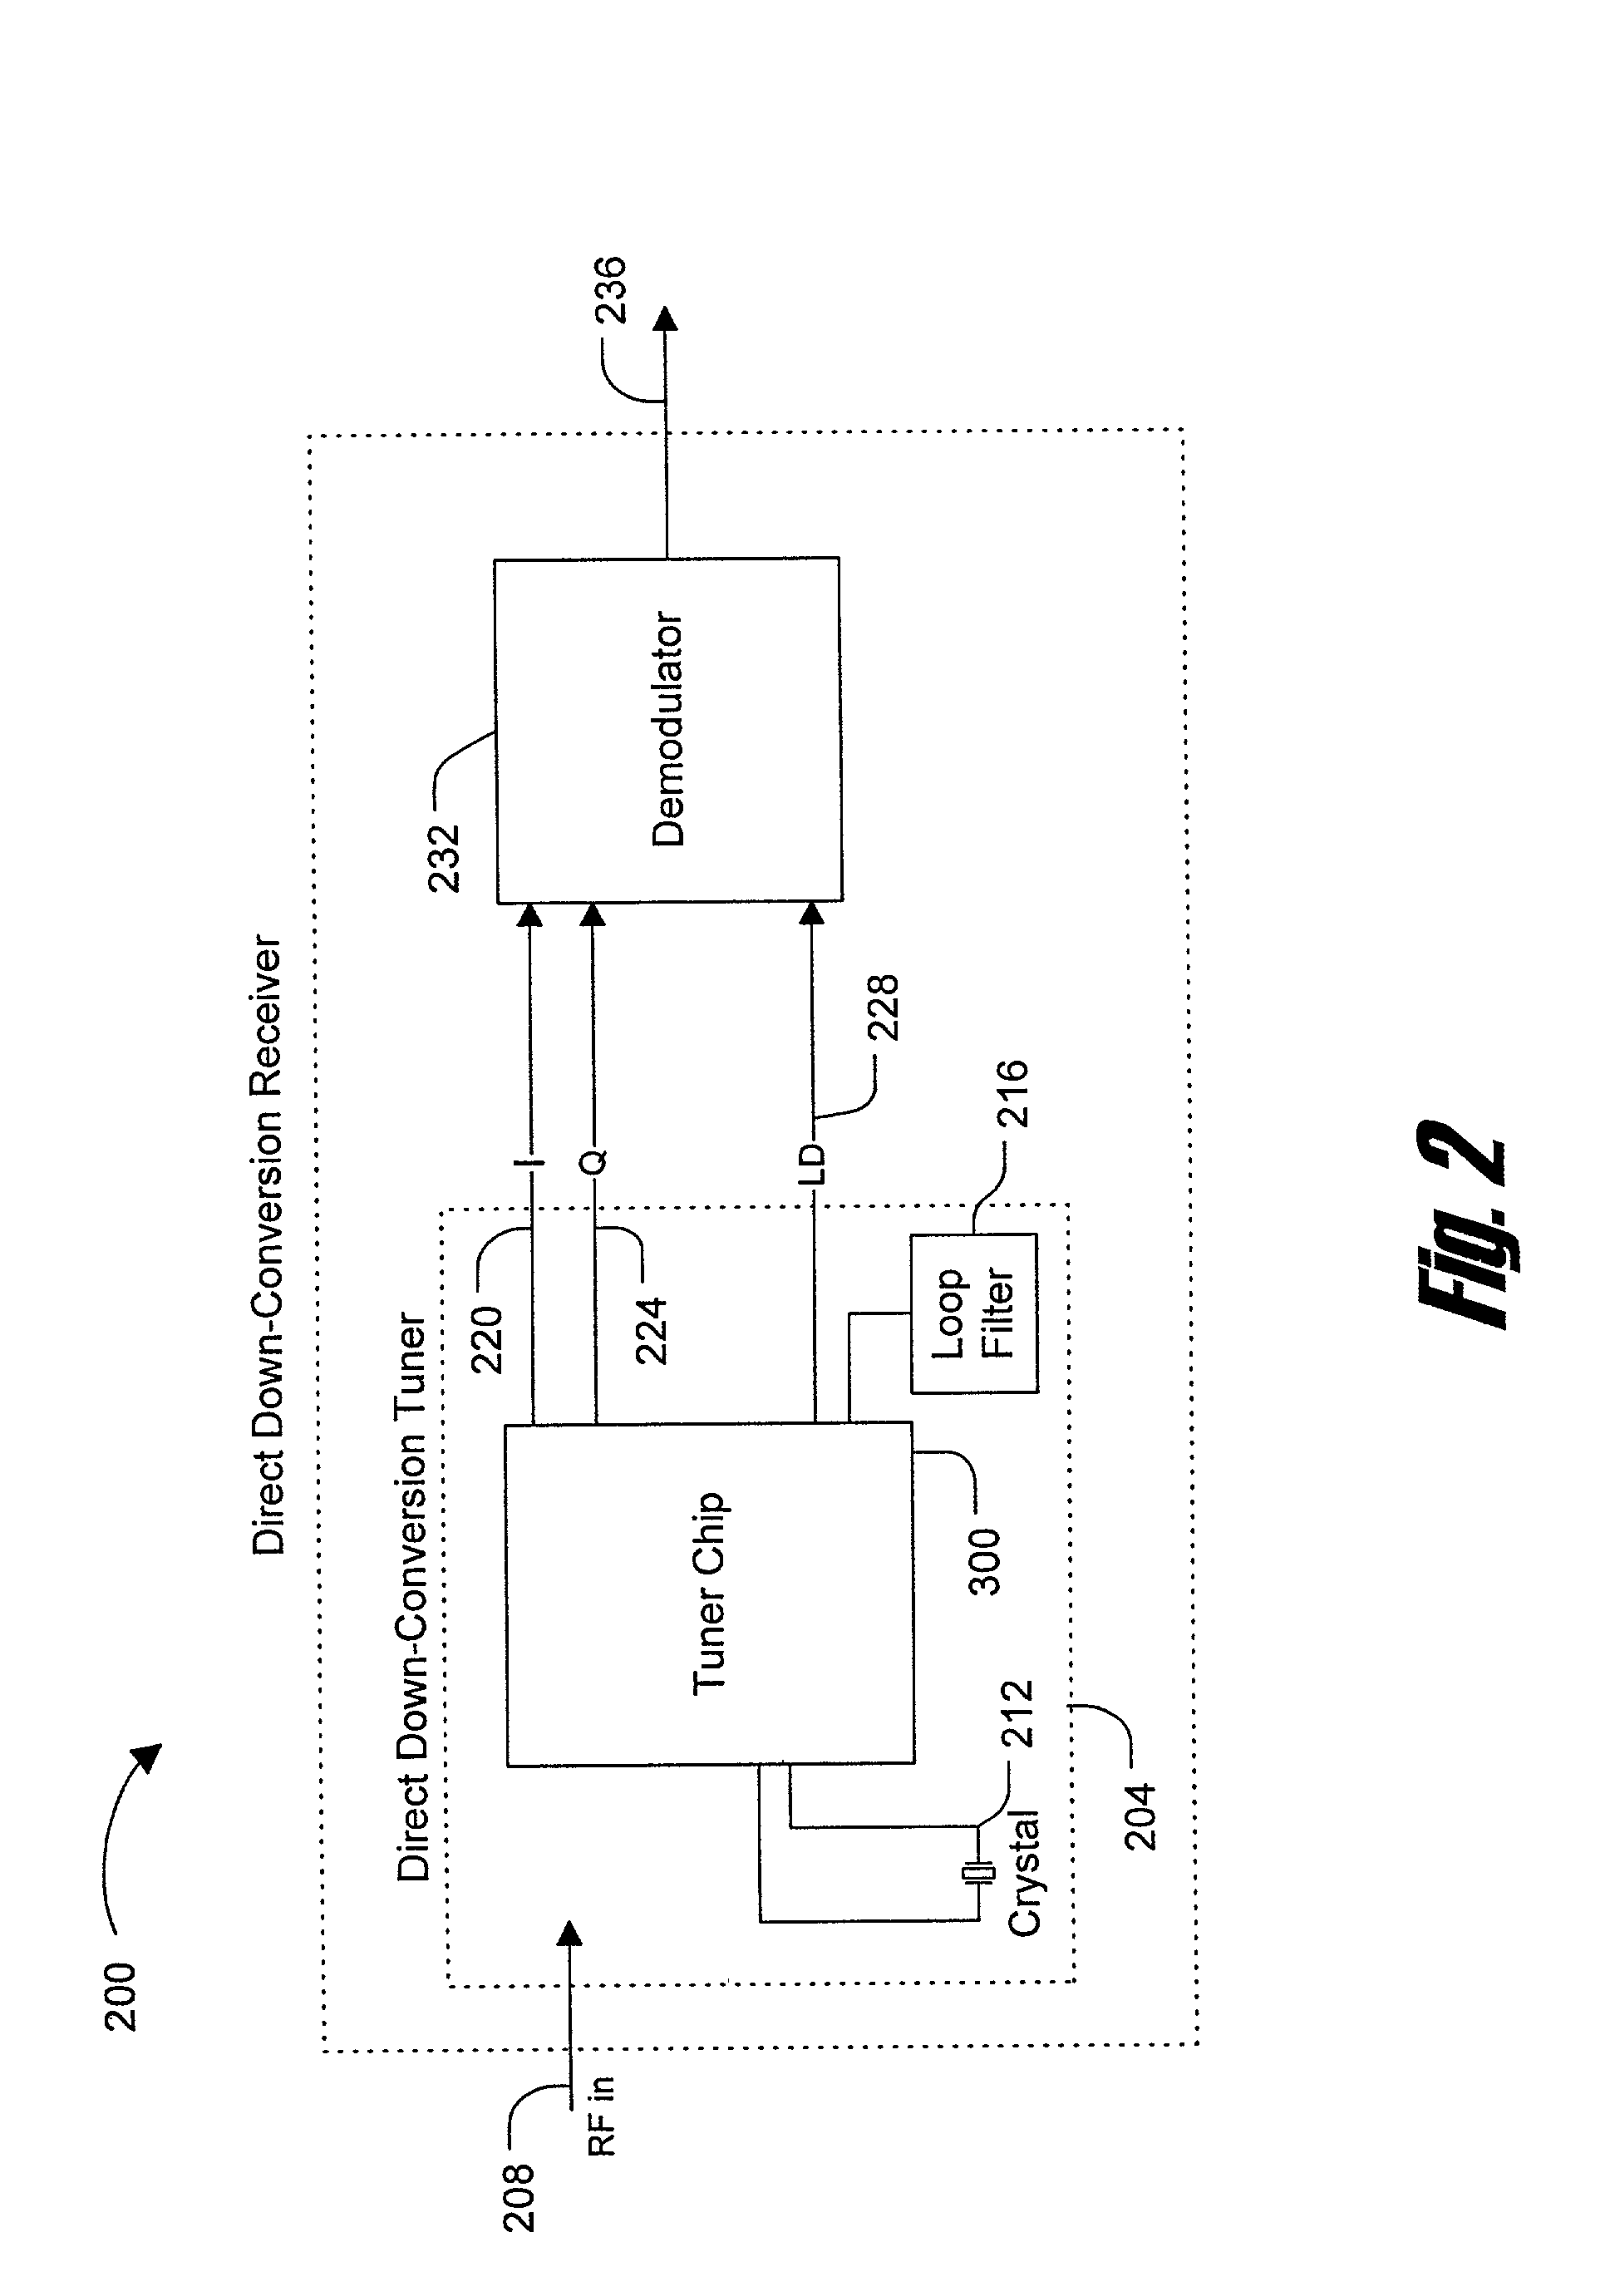 System and method of frequency synthesis to avoid gaps and VCO pulling in direct broadcast satellite systems